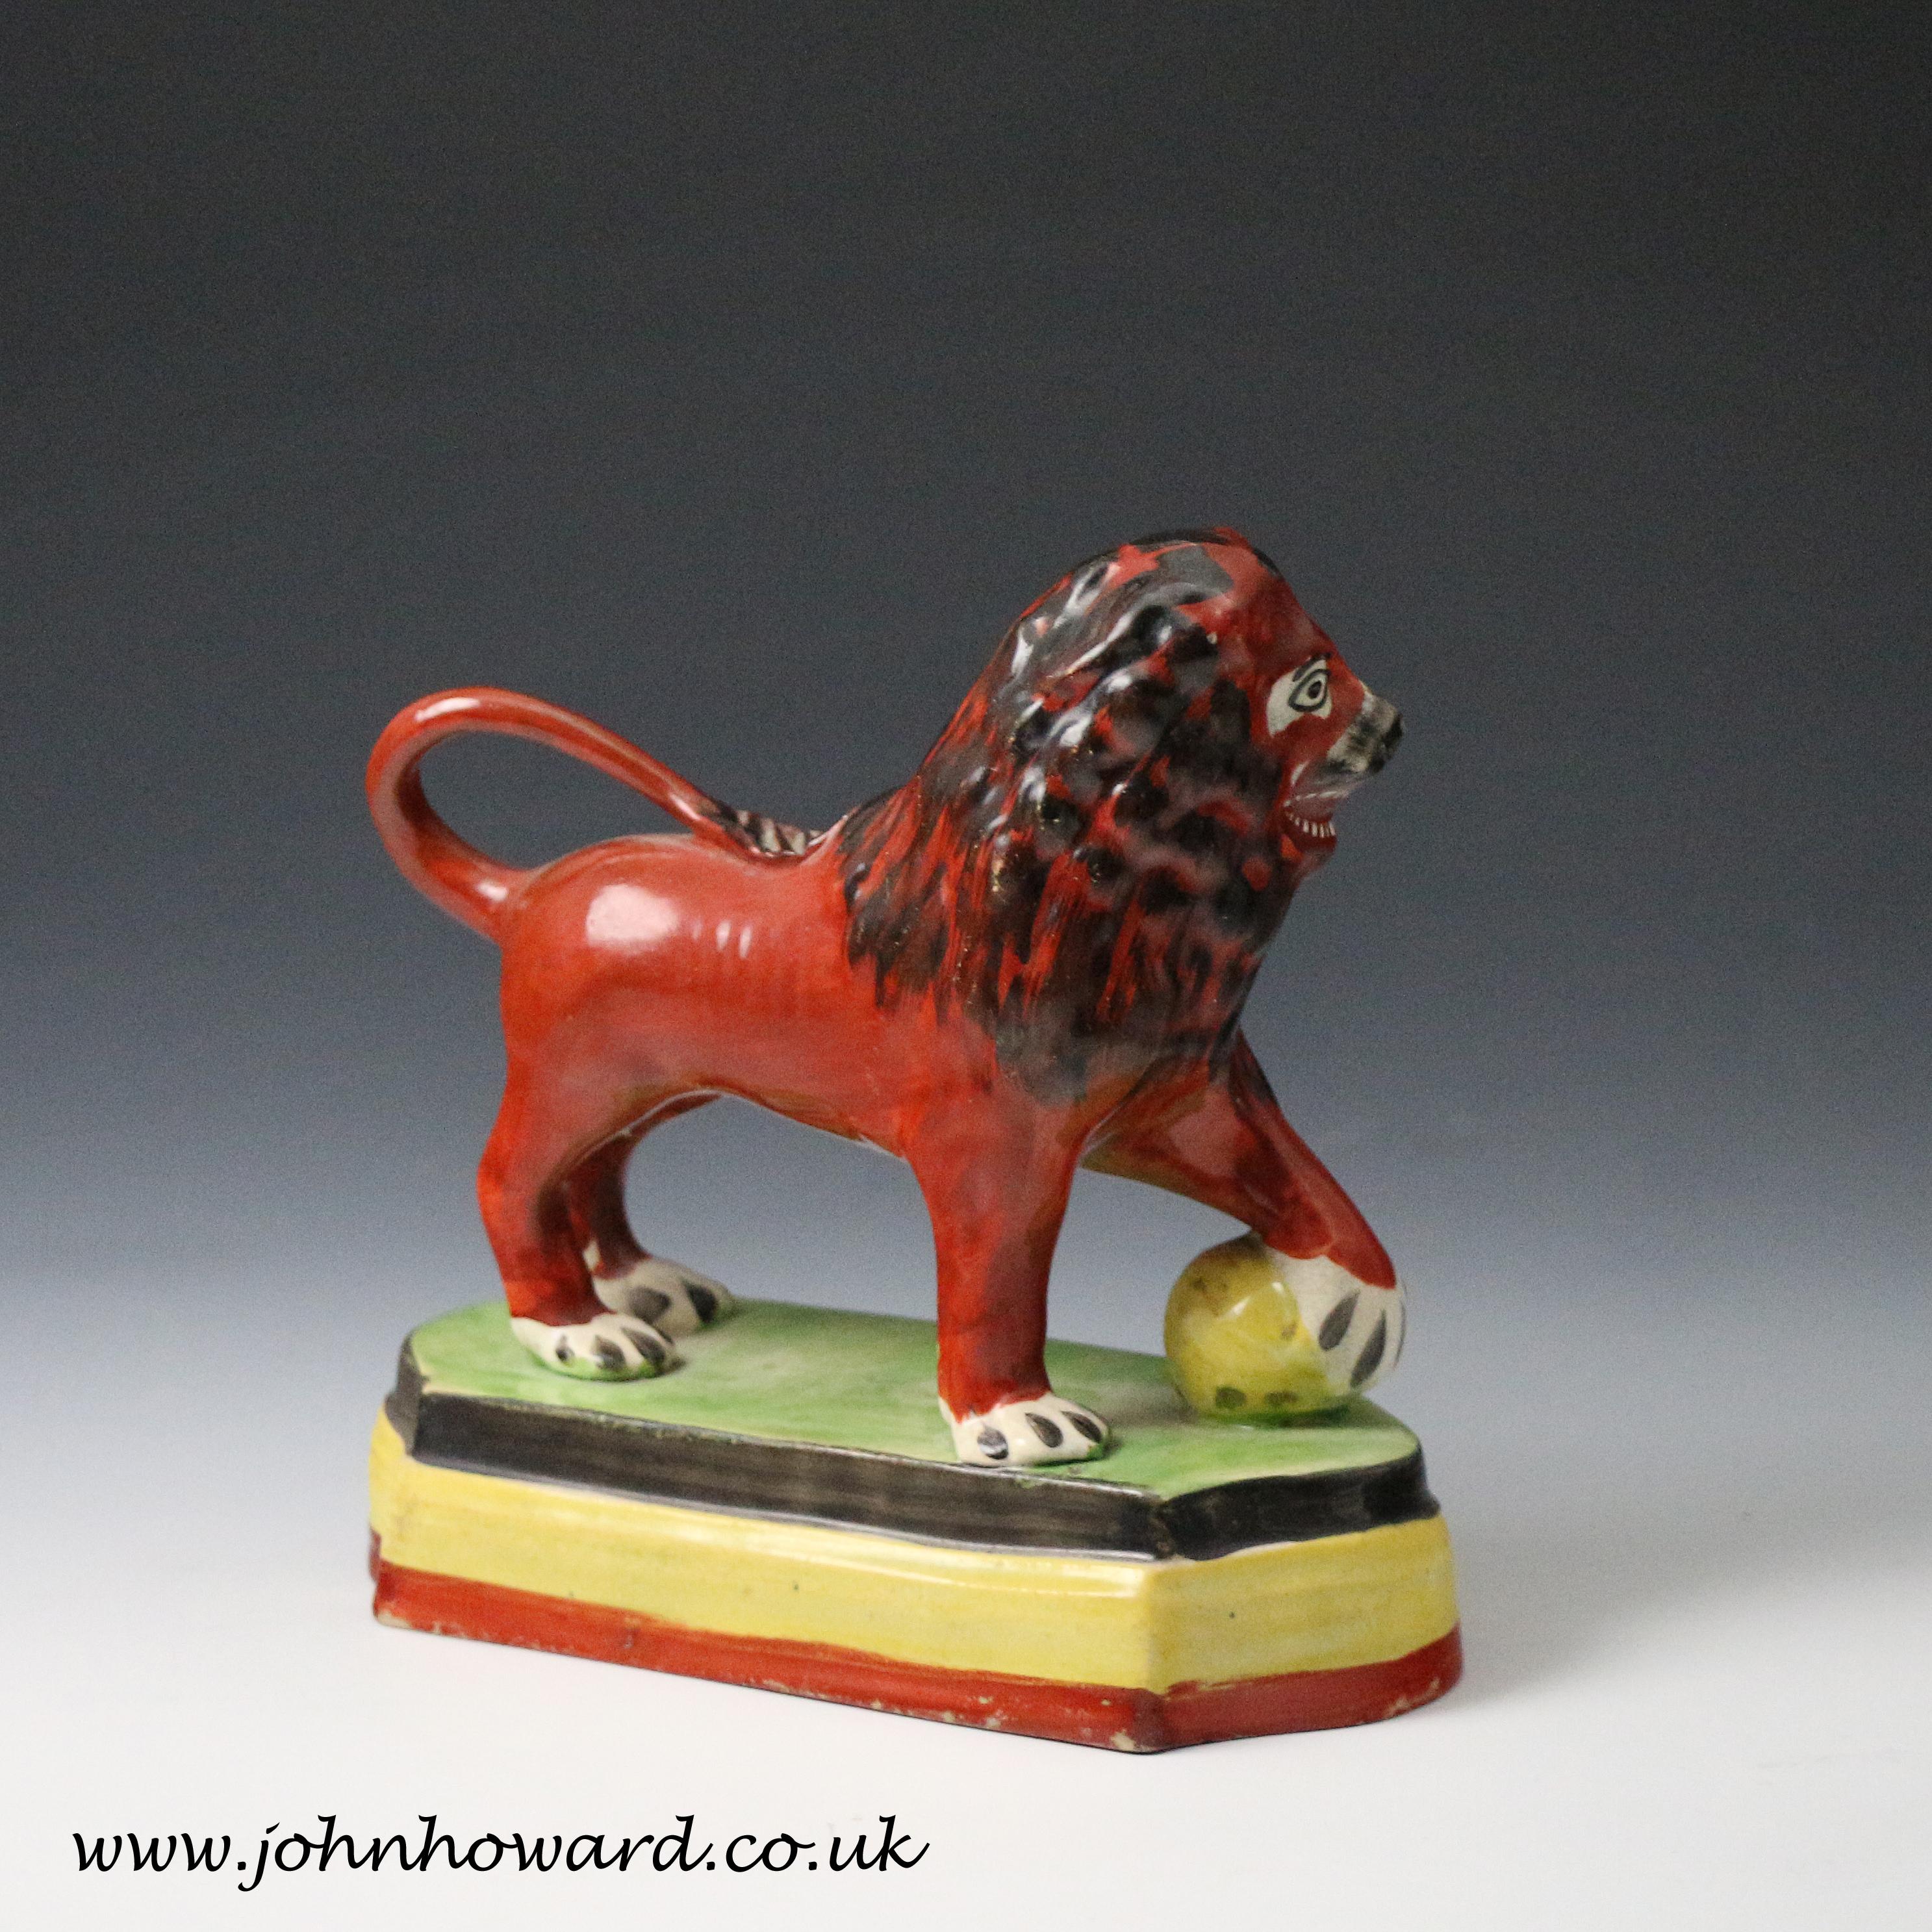 Dated: 1820 Staffordshire, England

A Staffordshire pottery pearlware figure of a lion with a paw resting on a yellow ball. The lion sports an alarmingly vicious set of teeth which has a particular comedy within the fierceness. The rectangular